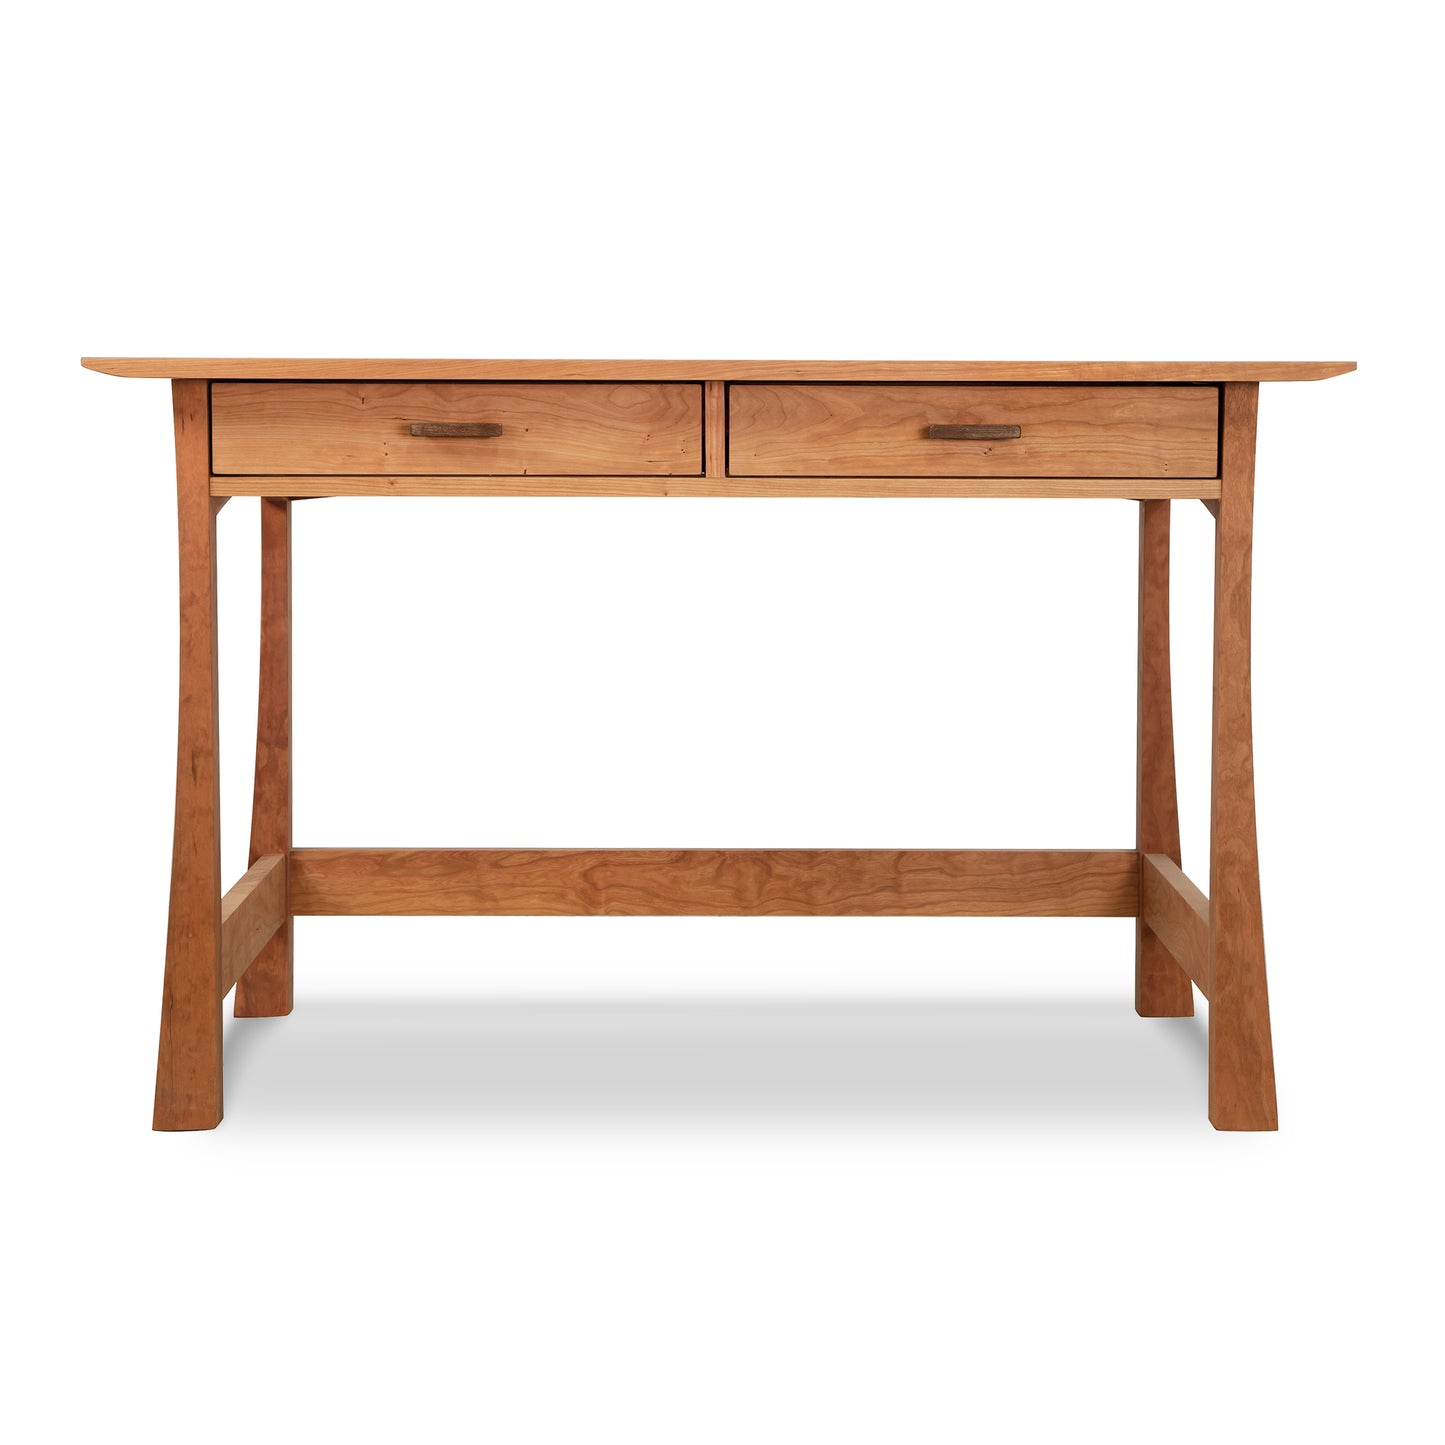 A Vermont Furniture Designs Contemporary Craftsman Writing Desk with two drawers and slanted legs, featuring an eco-friendly oil finish, isolated on a white background.